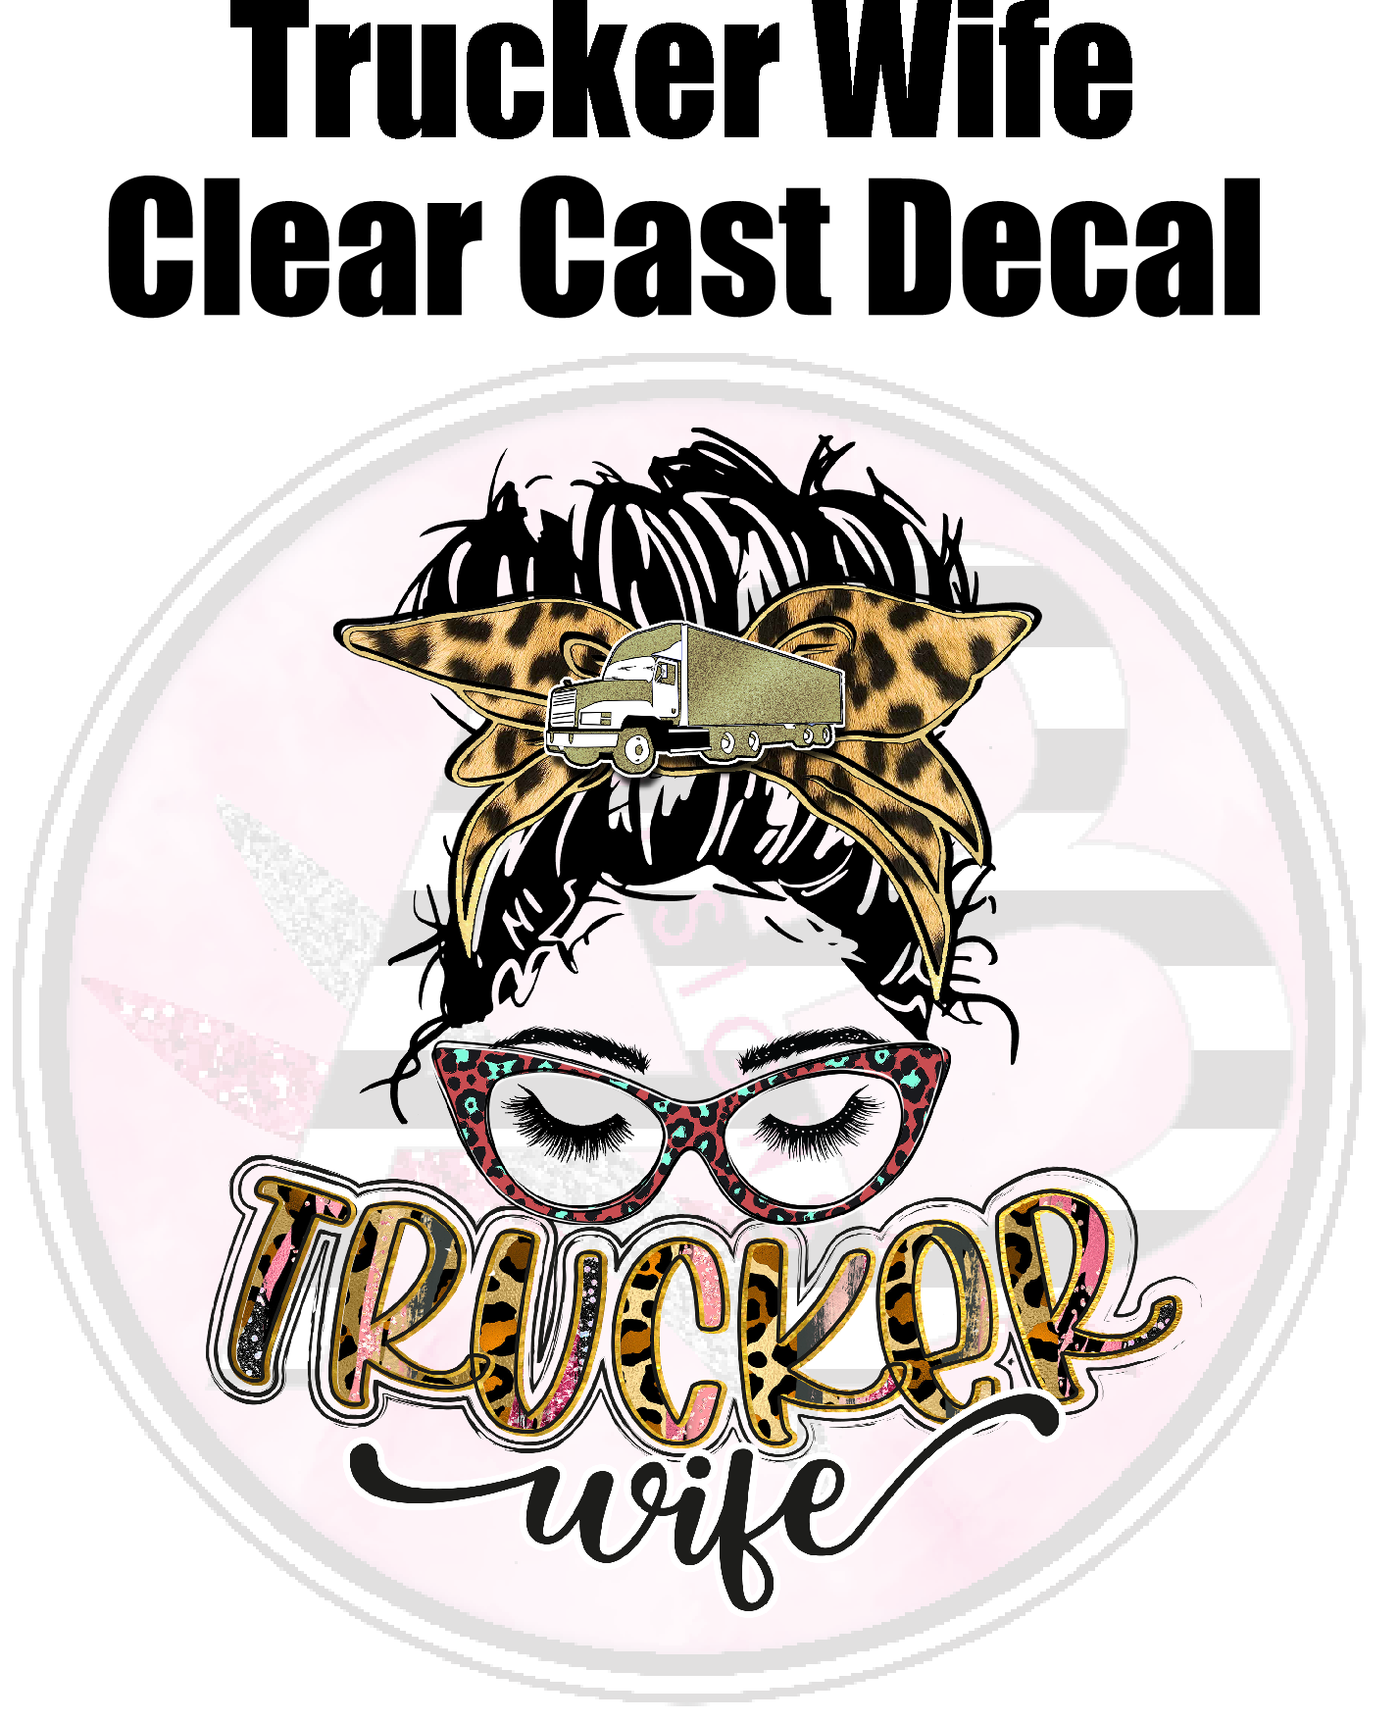 Trucker Wife - Clear Cast Decal